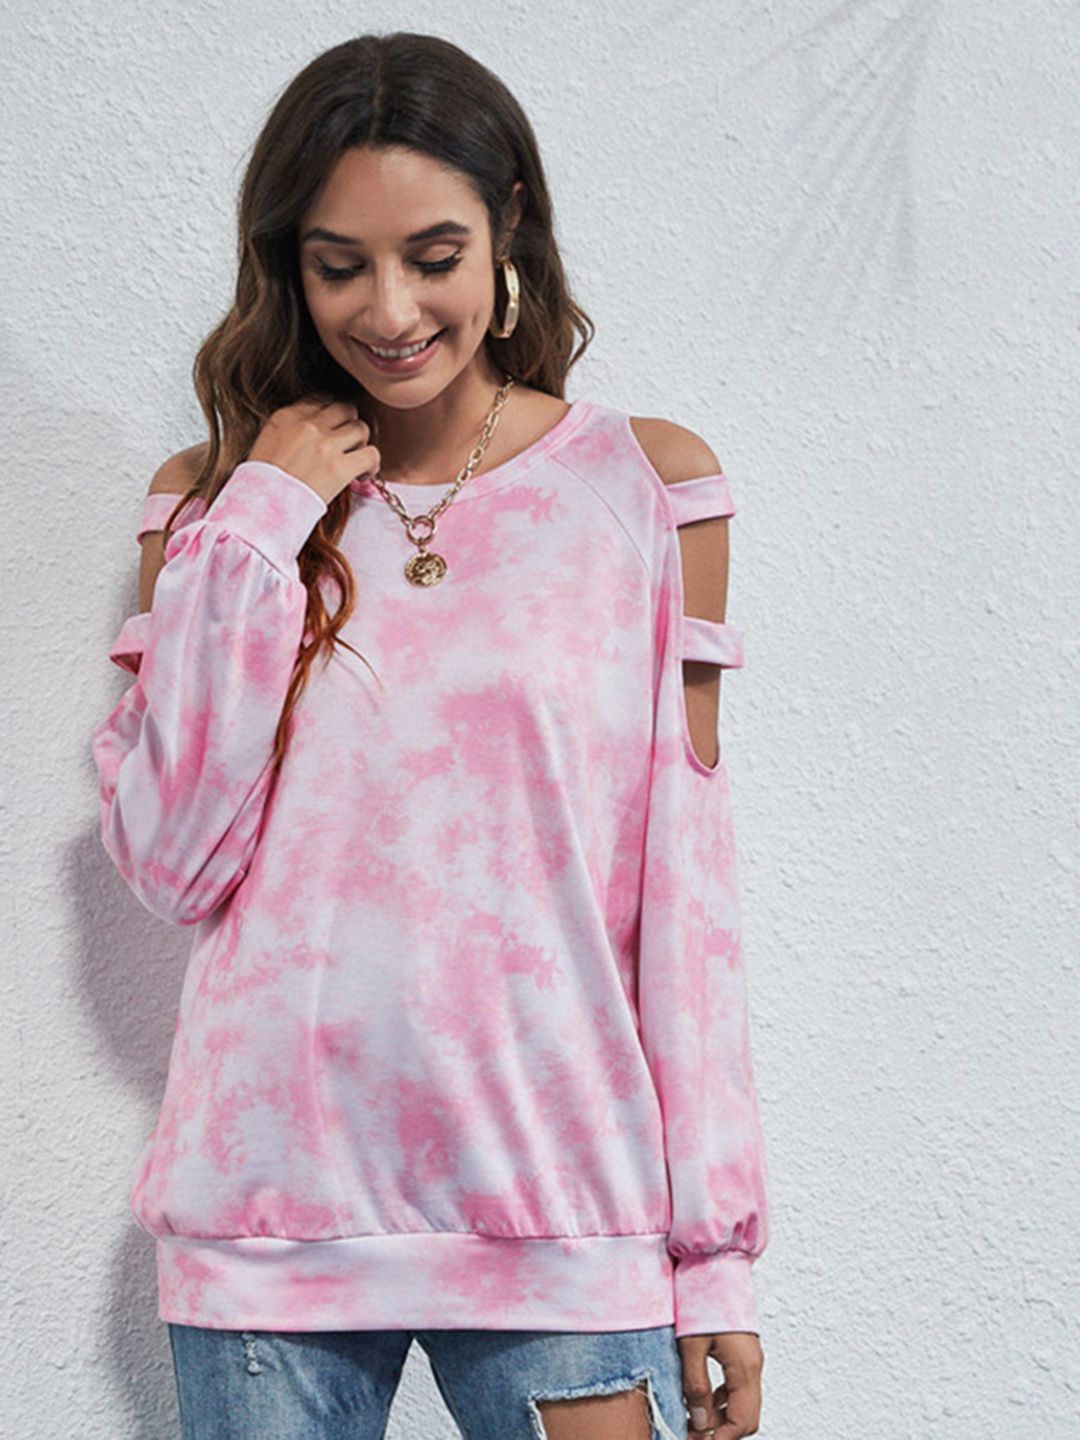 URBANIC Women Pink & White Tie & Dye Sweatshirt with Cut Out Detail Price in India